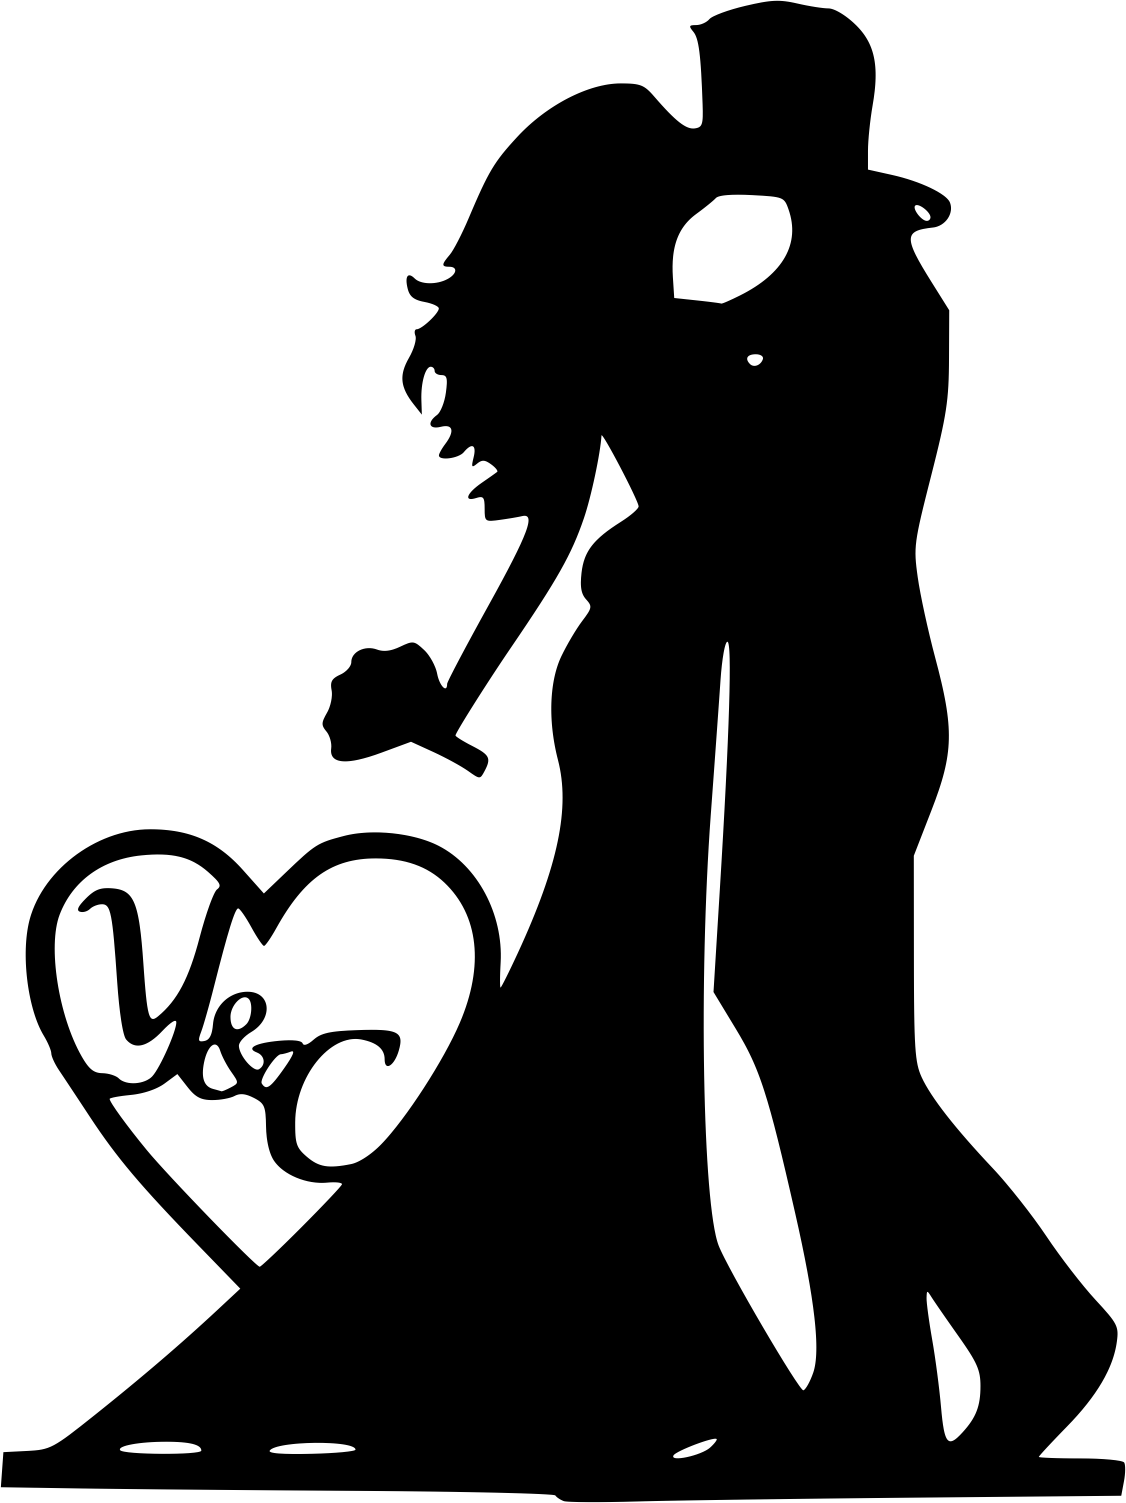 Mr and Mrs Silhouette Black Bride and Groom Vector Free Vector cdr